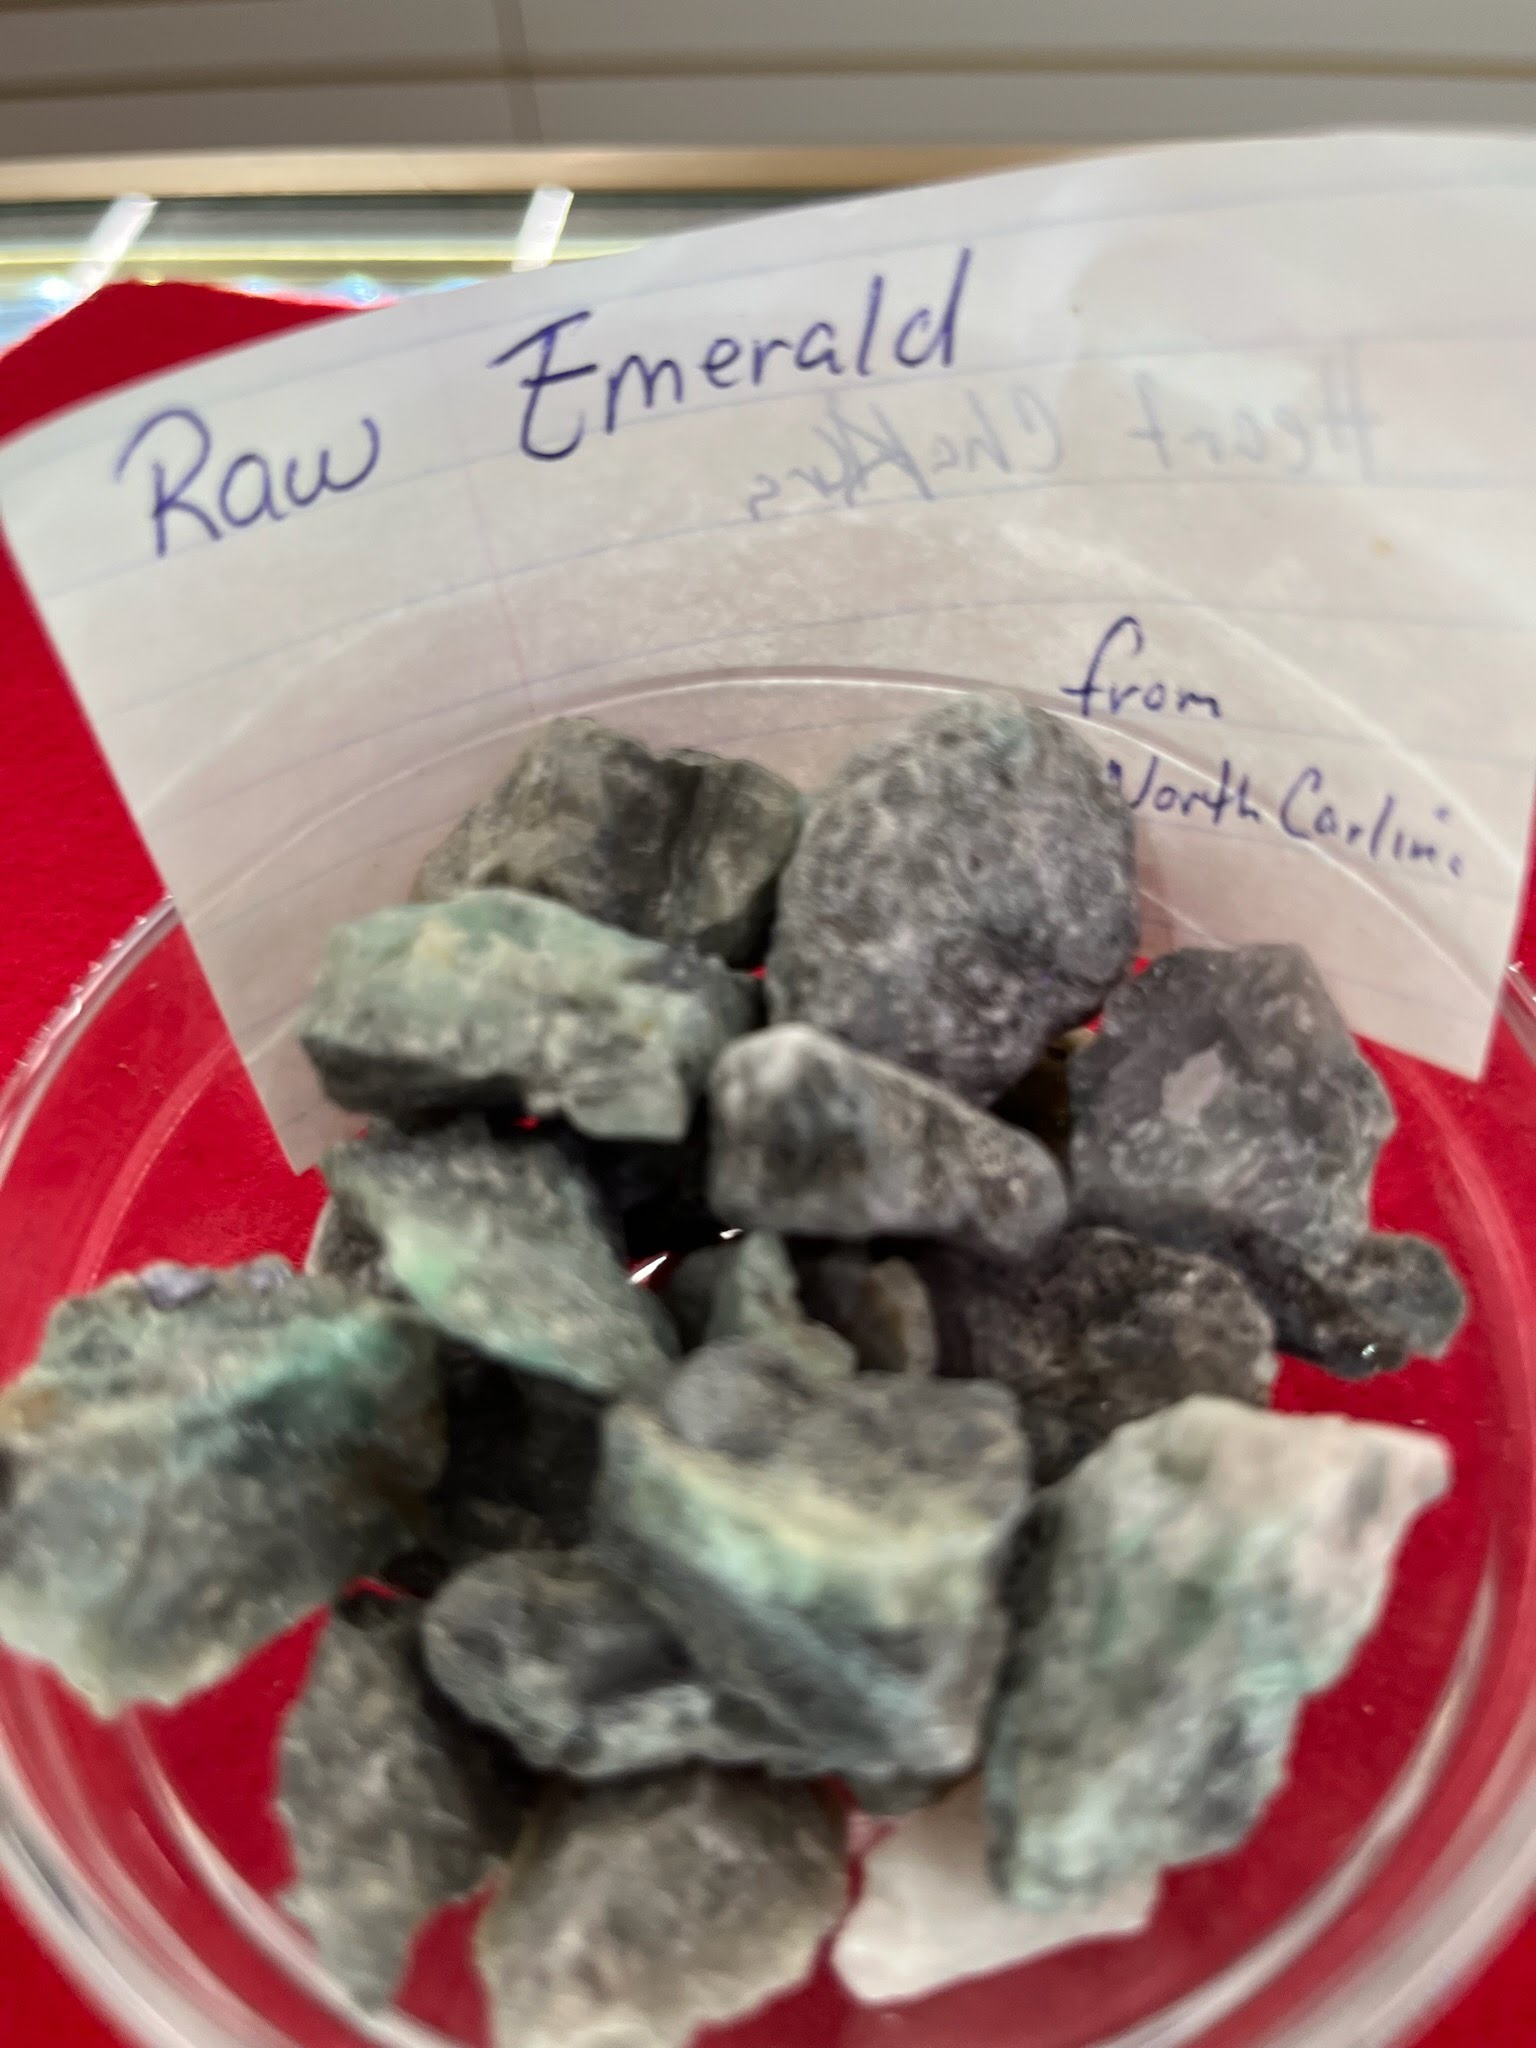 A cup of raw emerald is on the table.